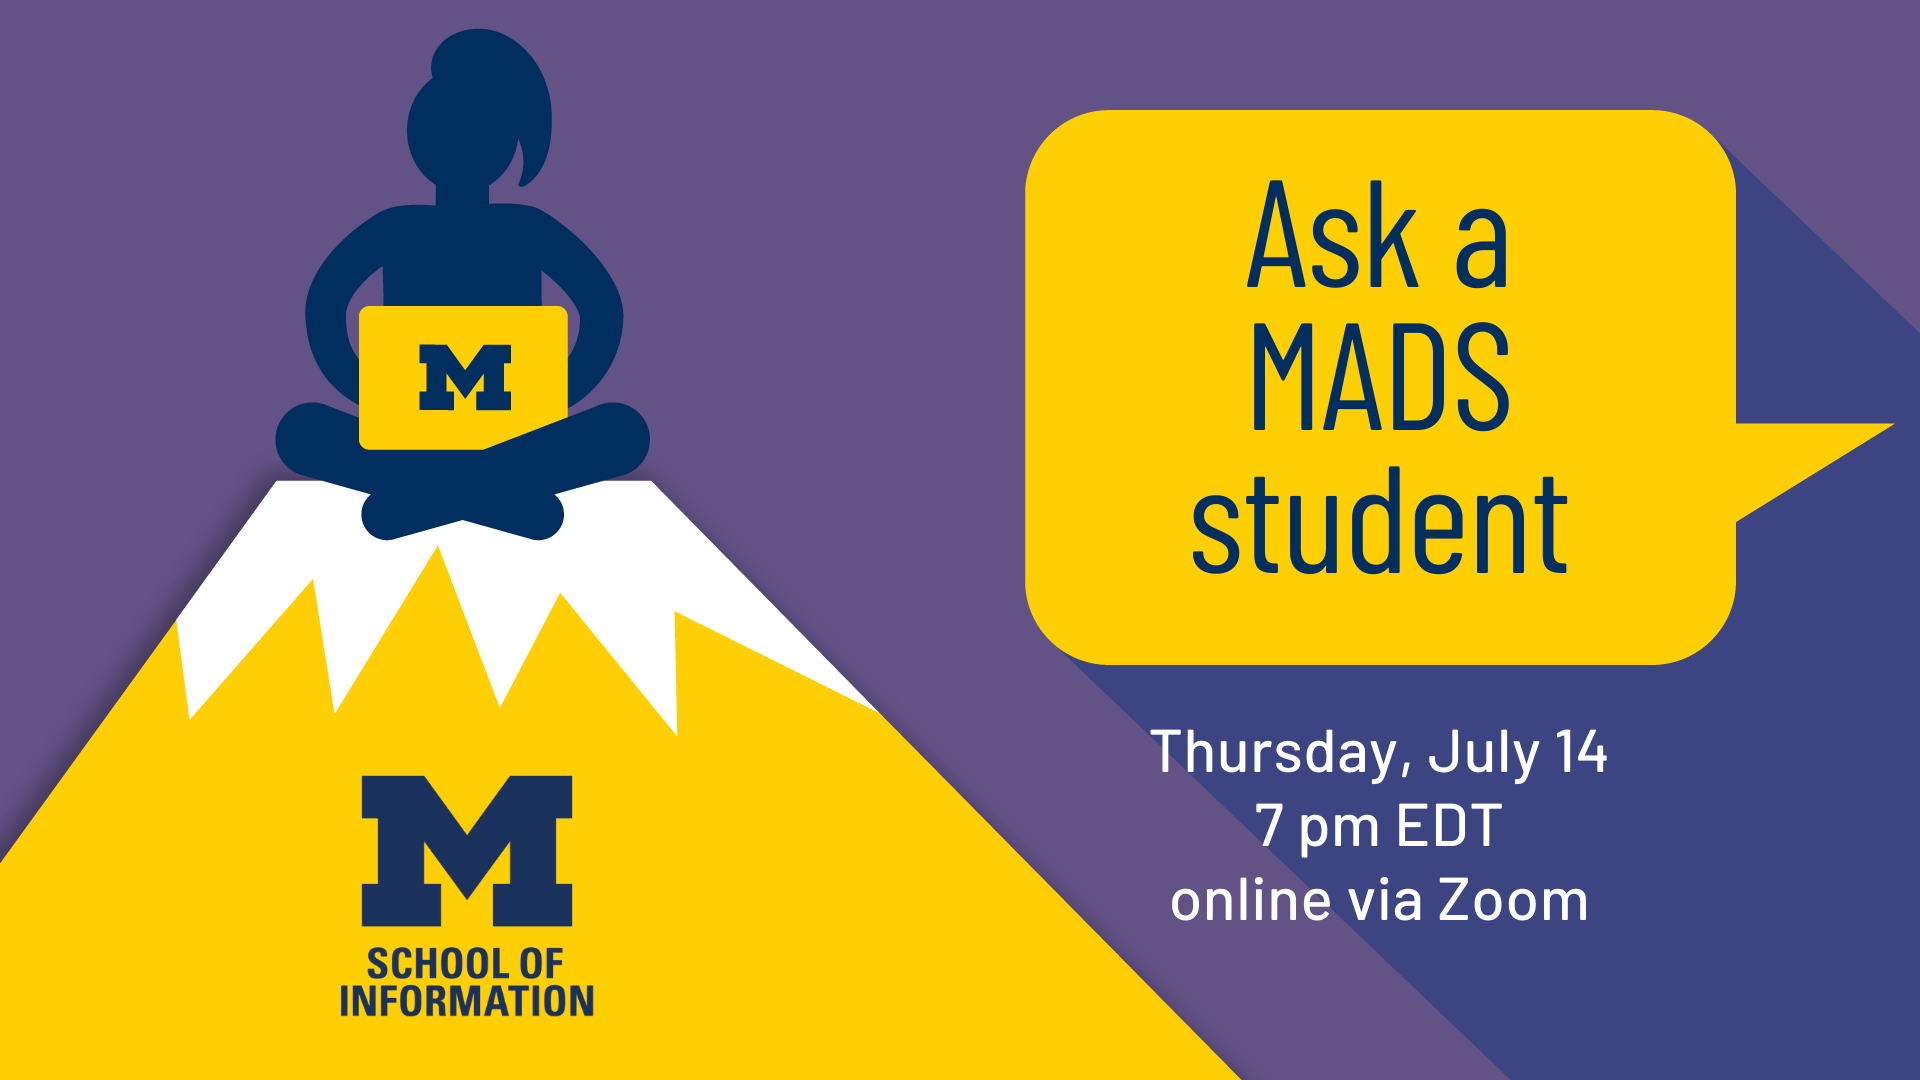 “Ask a MADS student. Thursday, July 14. 7 pm EDT. Online via Zoom.”